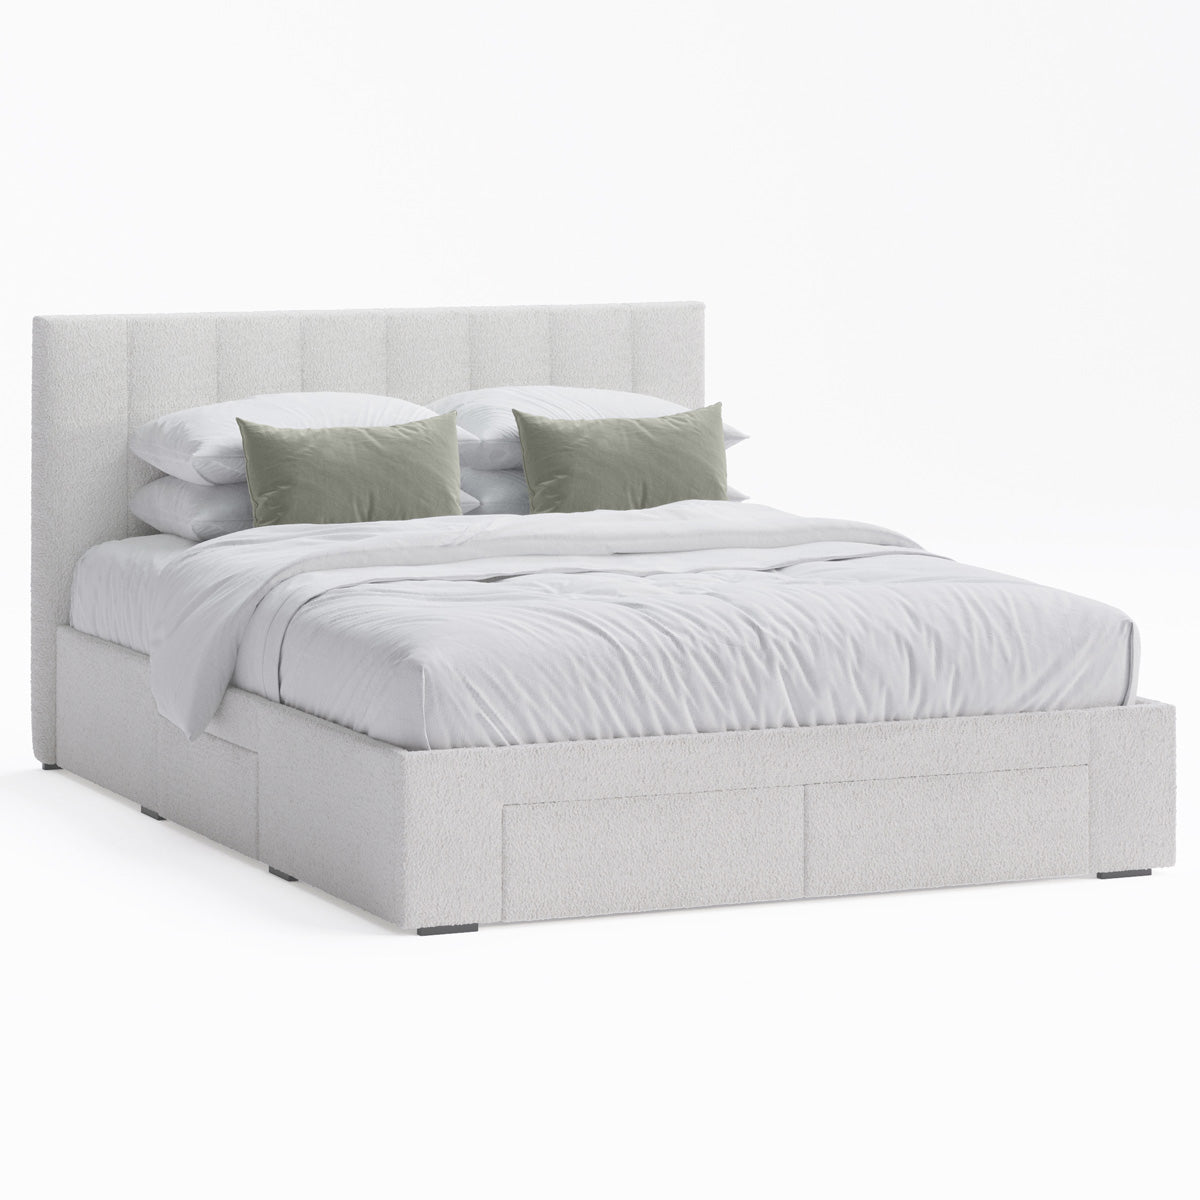 Ormond Storage Bed Frame with Four Extra Large Drawers (Ivory White Boucle Fabric)